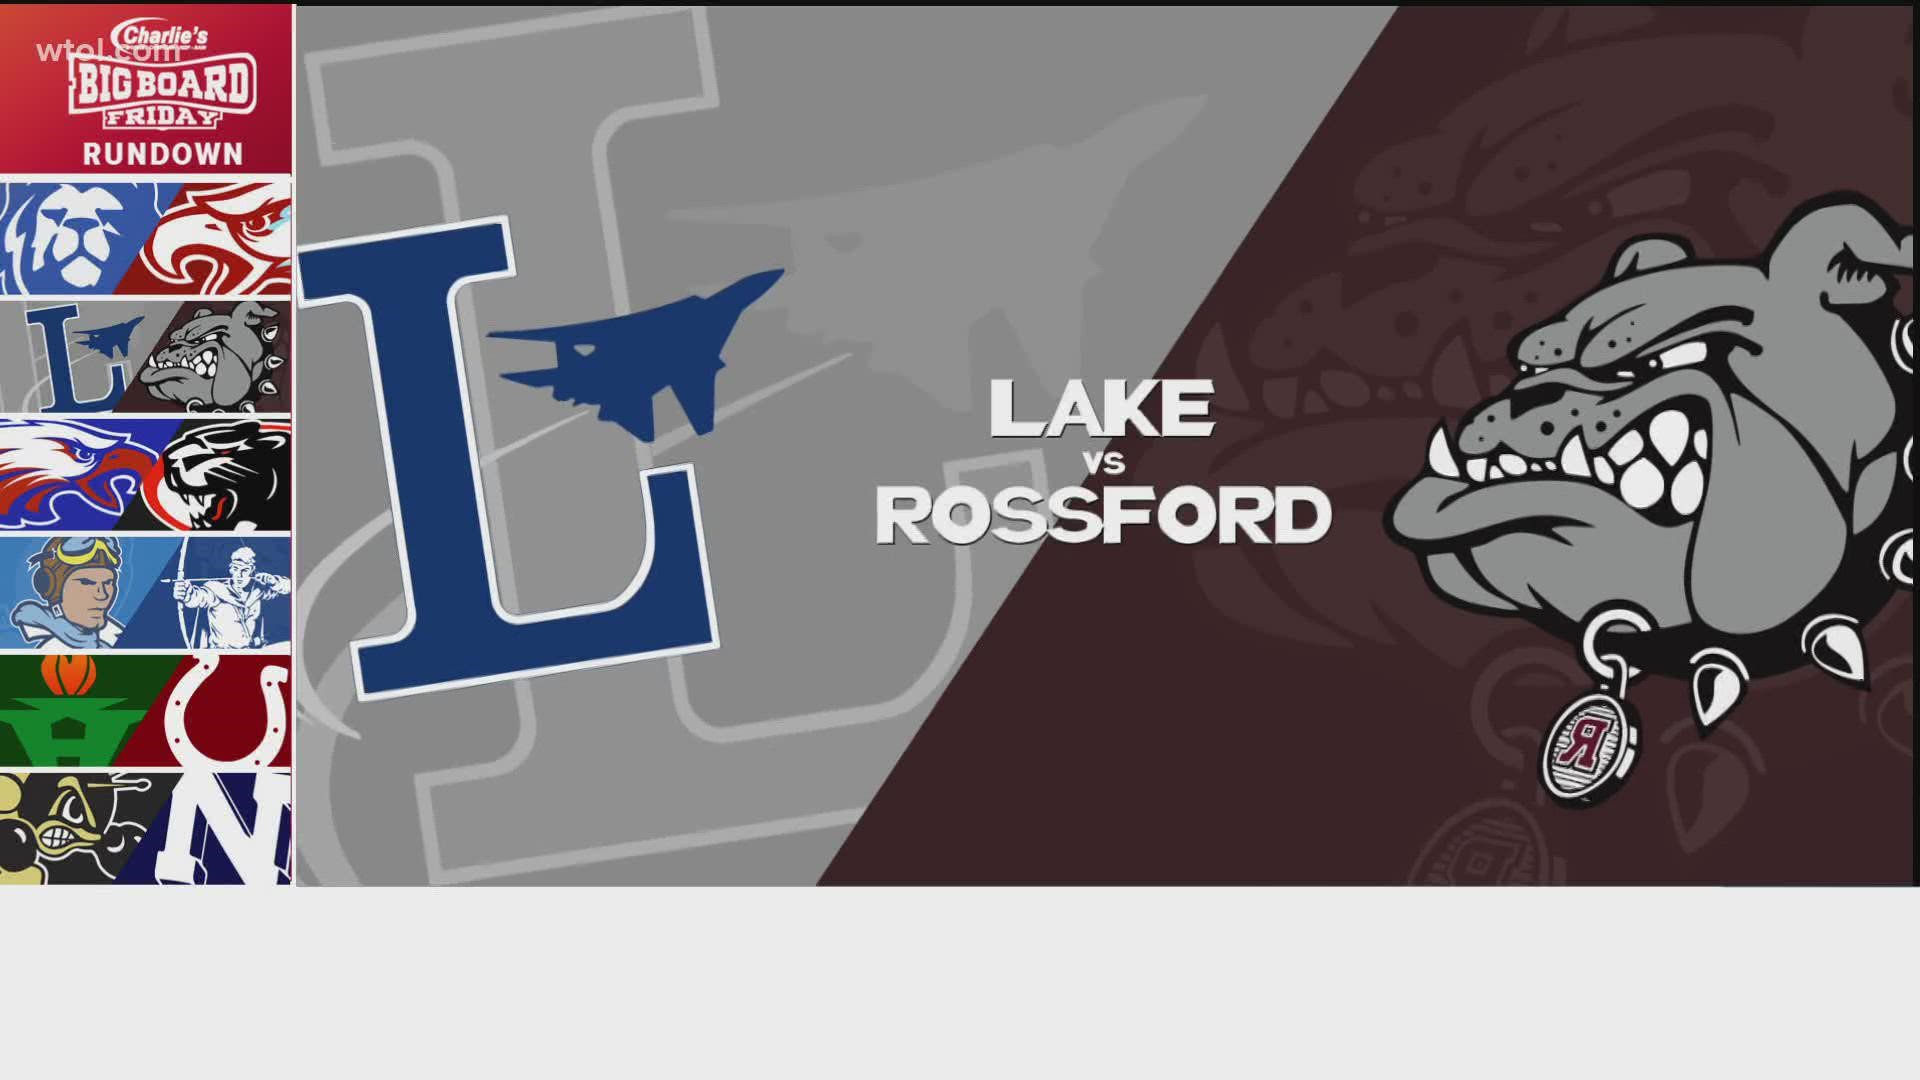 The Flyers took on the Bulldogs Friday. But, Rossford came out on top with a score of 79-57.